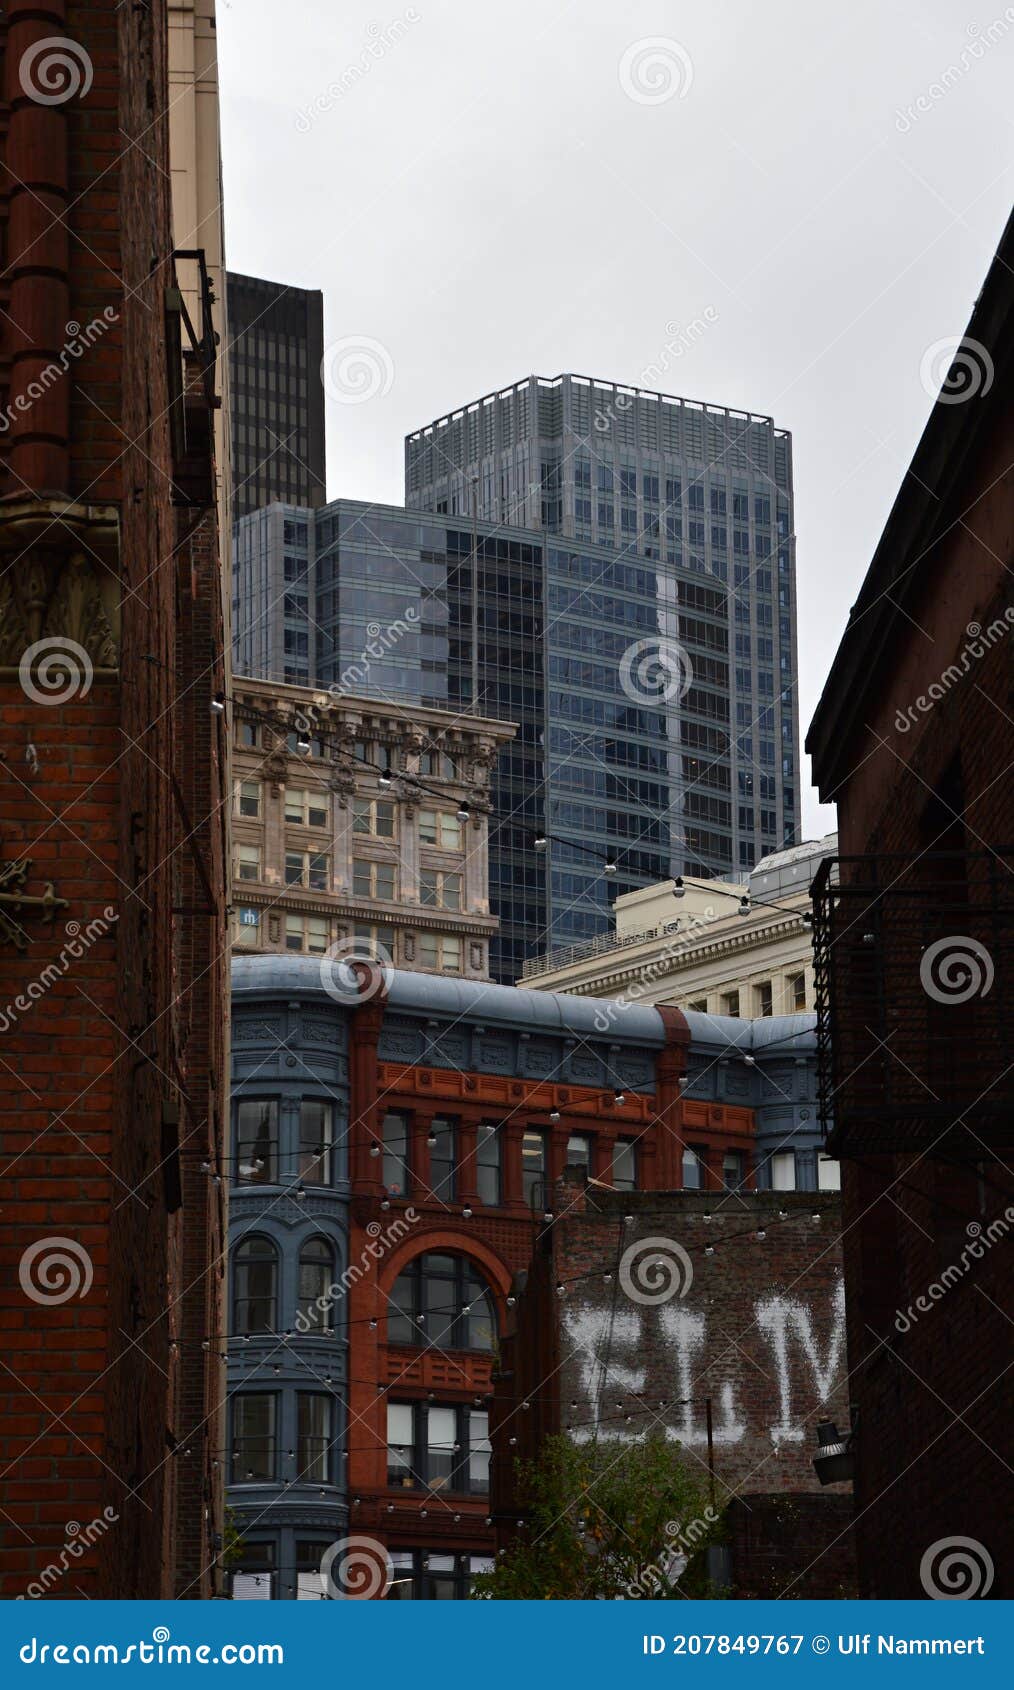 historical and modern buildings in dowtown seattle at the puget sound, washington